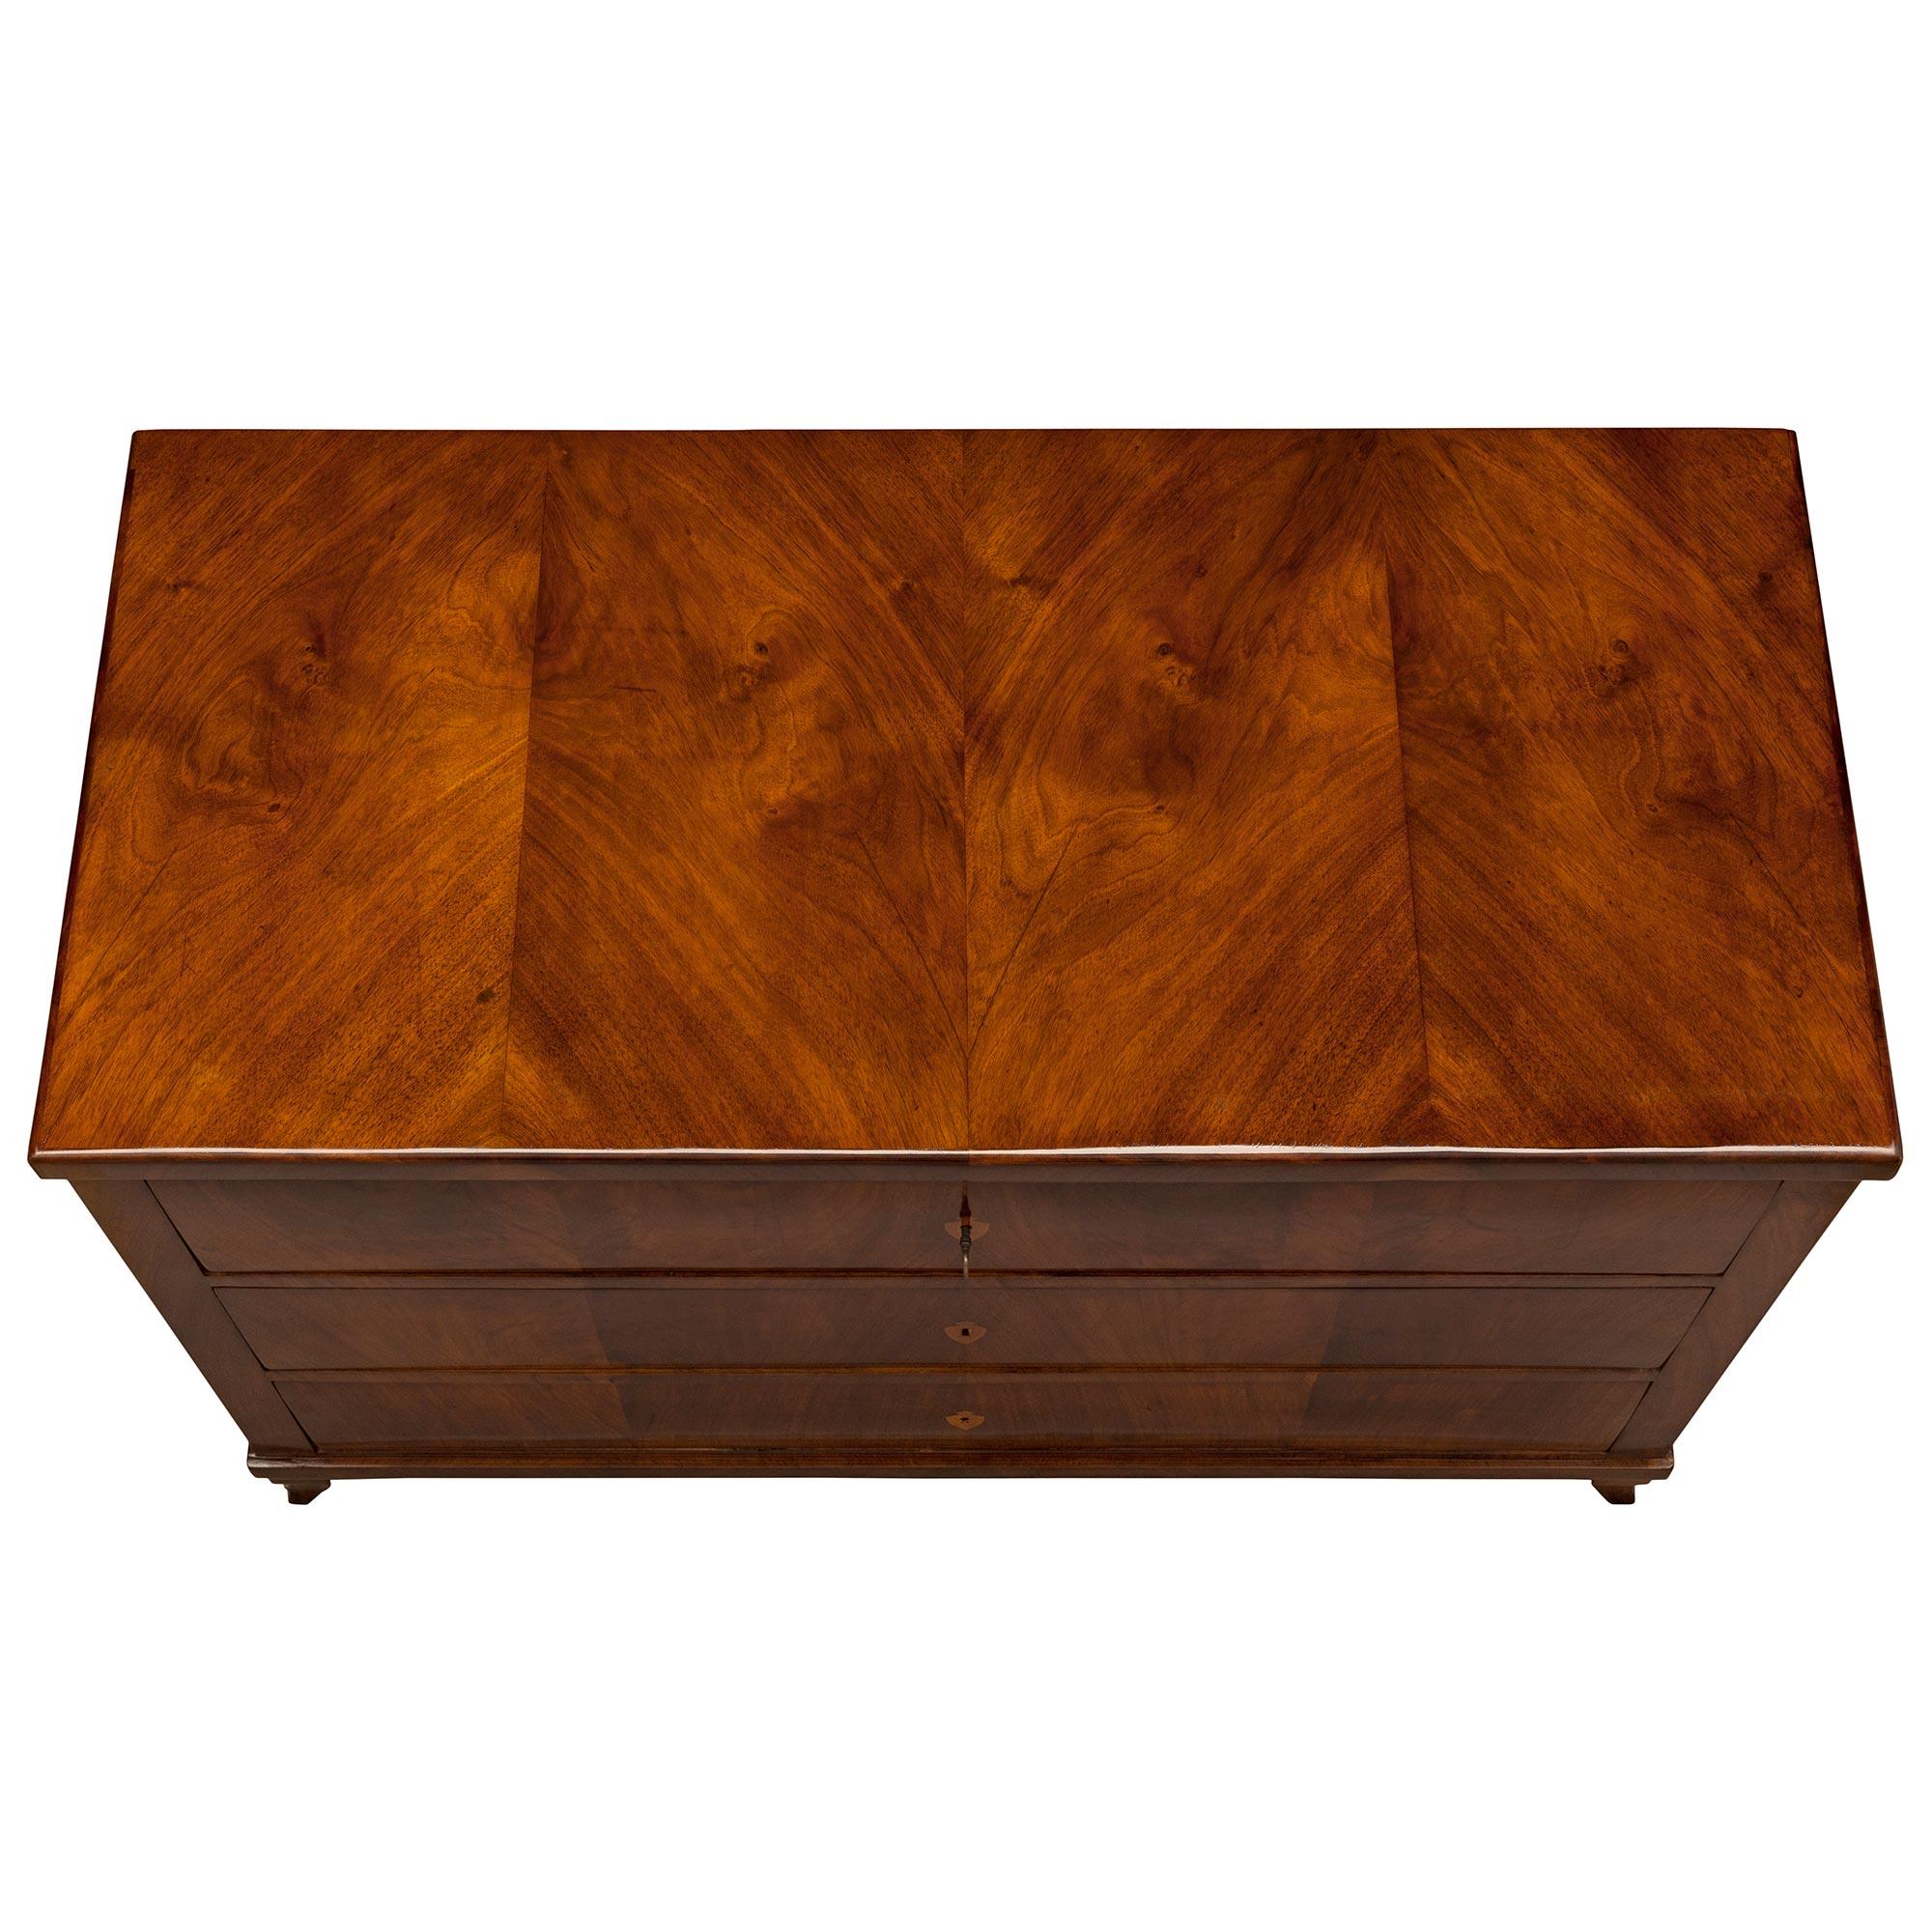 A handsome and most elegant Continental 19th century Biedermeier st. Walnut chest circa 1840. The three drawer chest is raised by elegant scrolled tapered feet below the straight apron. Each of the three drawers showcases the stunning butterfly